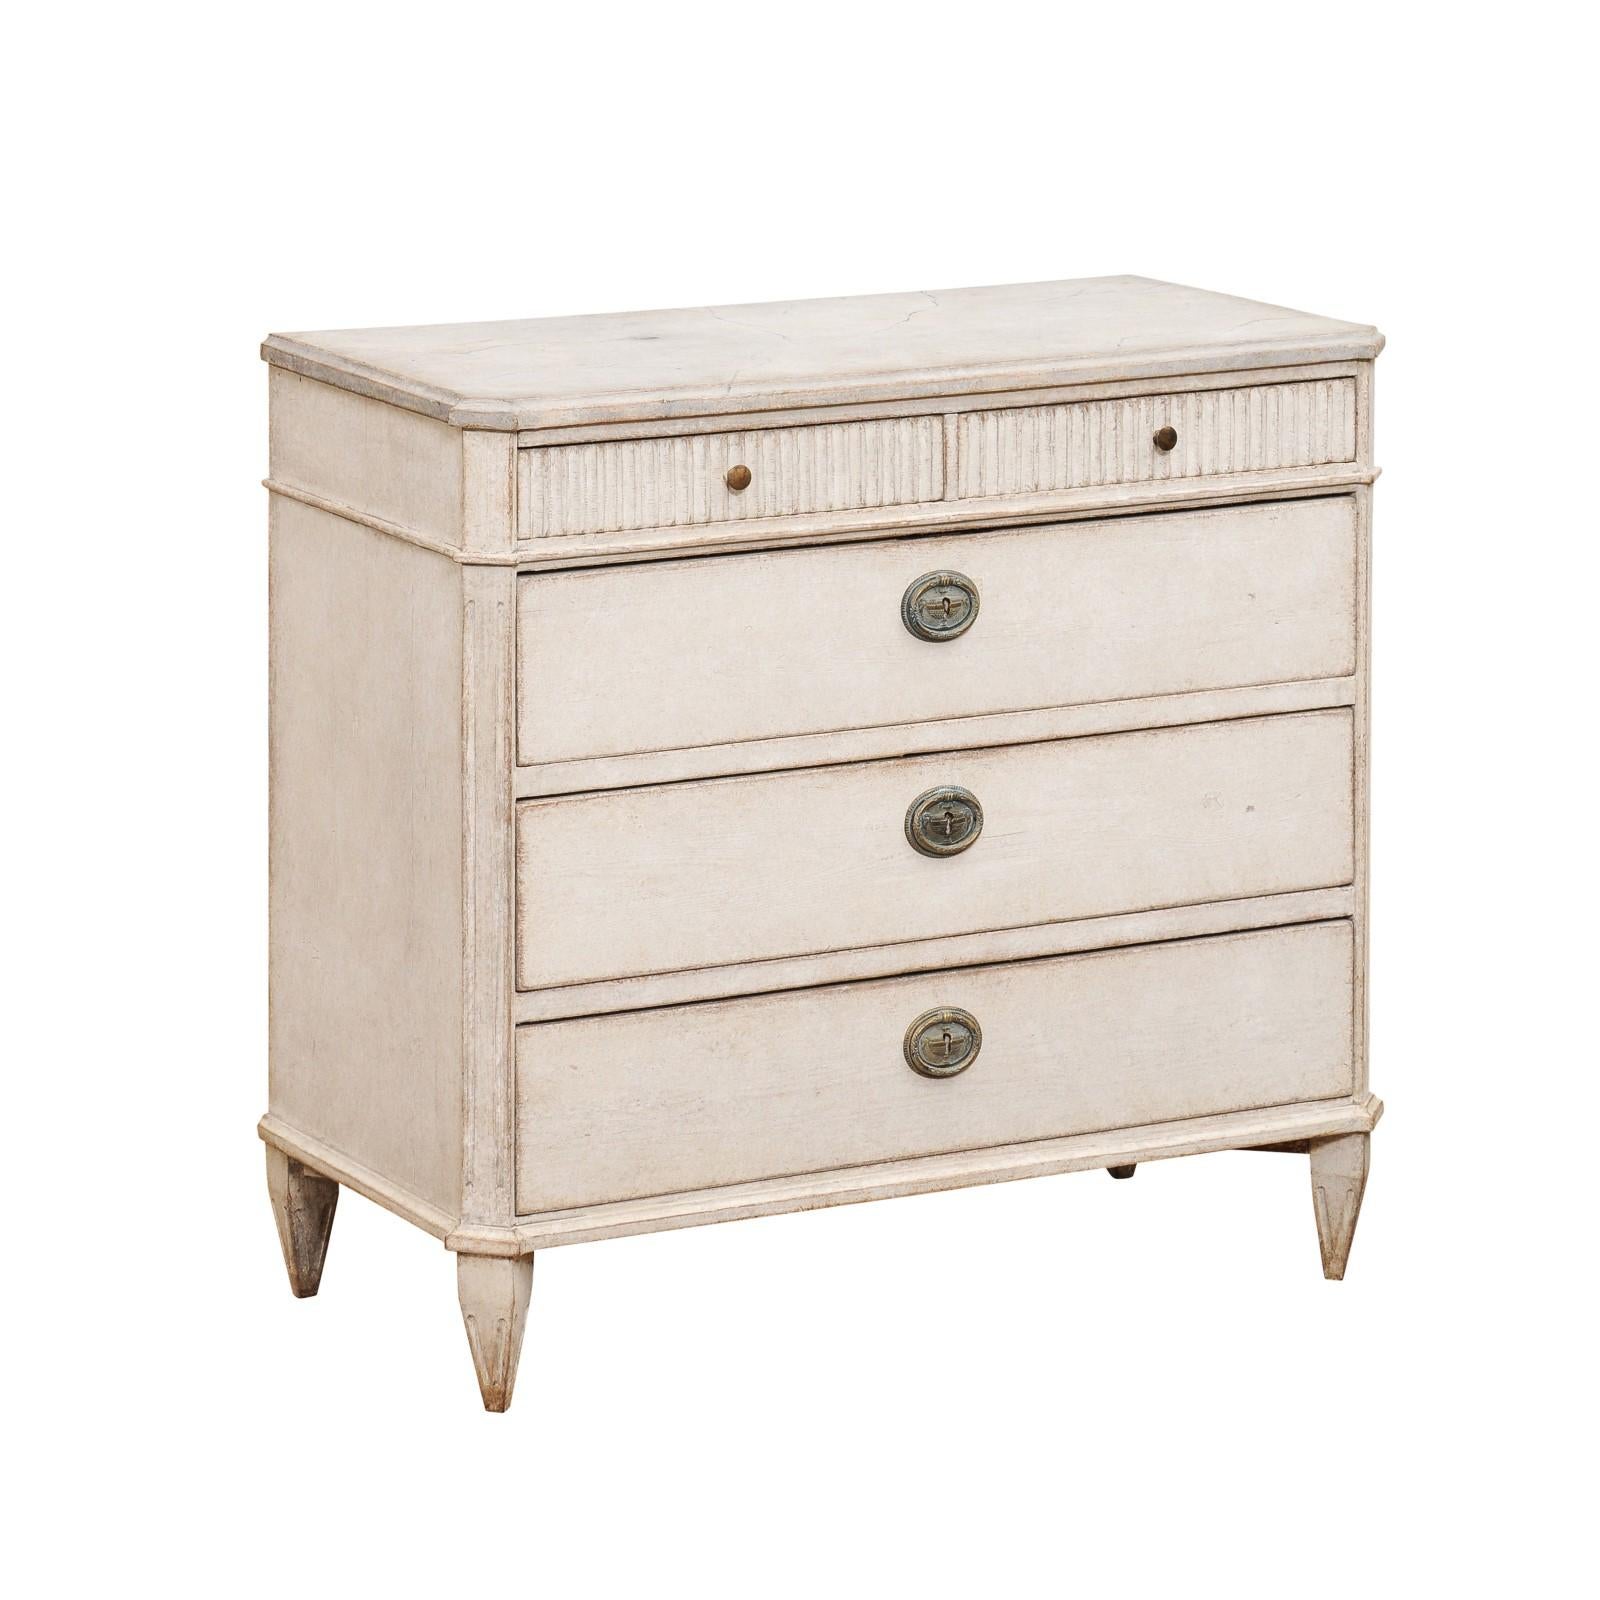 A Swedish Gustavian style painted chest circa 1860 with five drawers, discreetly marbleized top, carved fluted accents, tapered feet and fluted side posts. Experience the quiet elegance of Scandinavian design with this Swedish Gustavian style